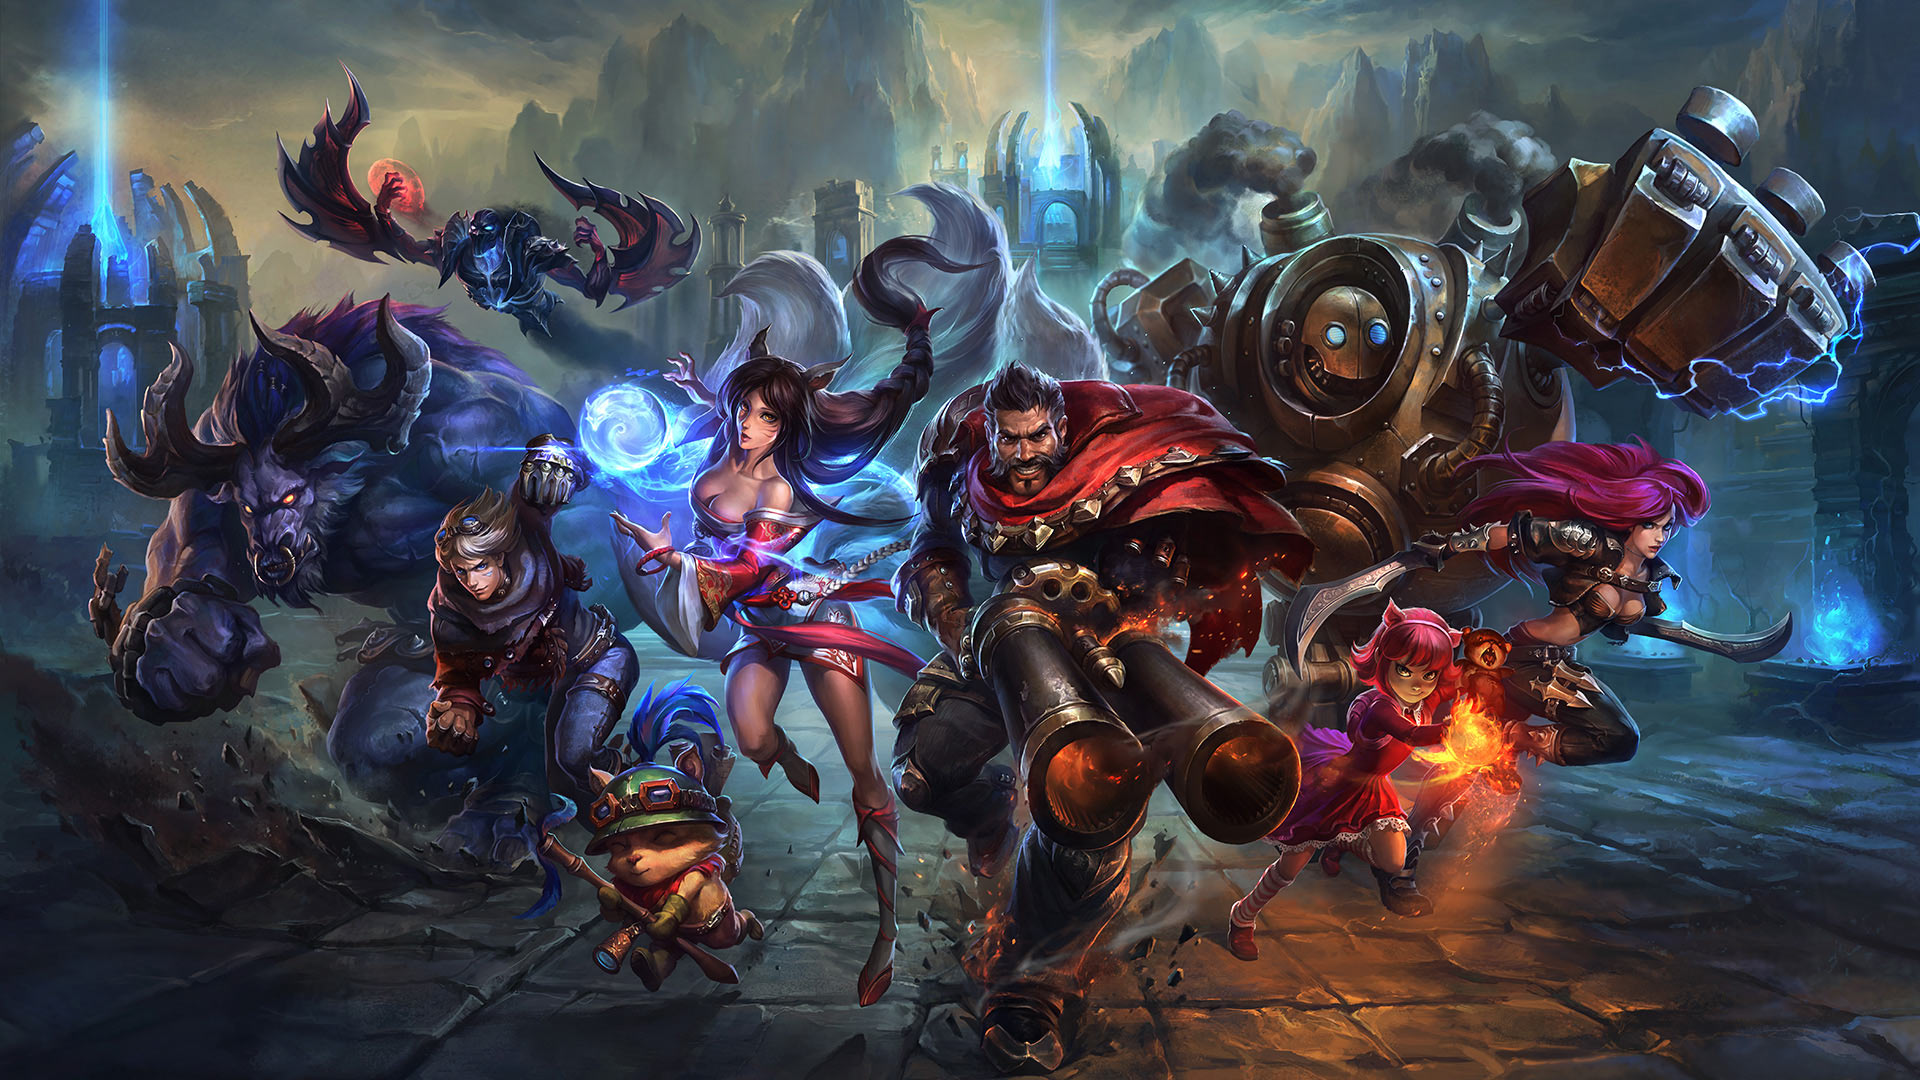 League of Legends down updates — Hundreds of gamers unable to connect after  gaming platform suffered server outage